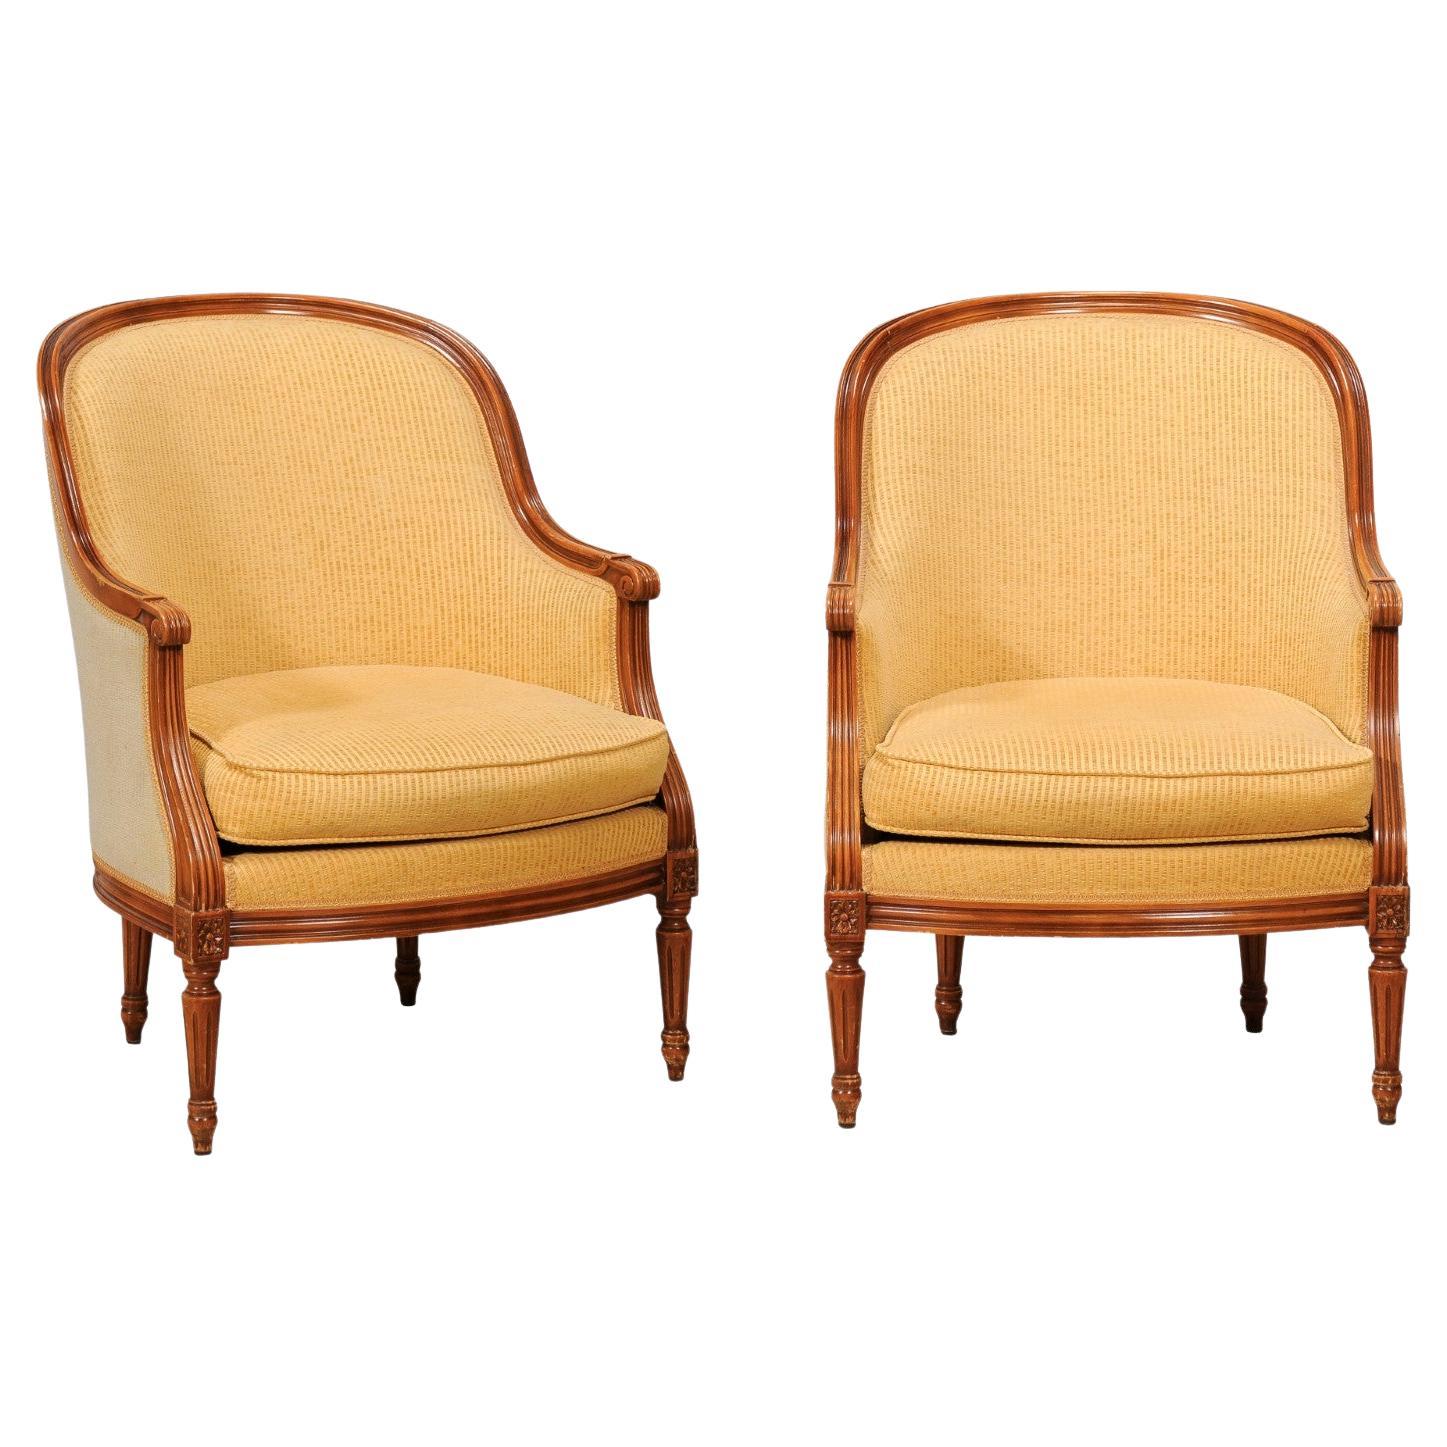 French Louis XVI Style Walnut Bergères Chairs with Wraparound Backs, Pair For Sale